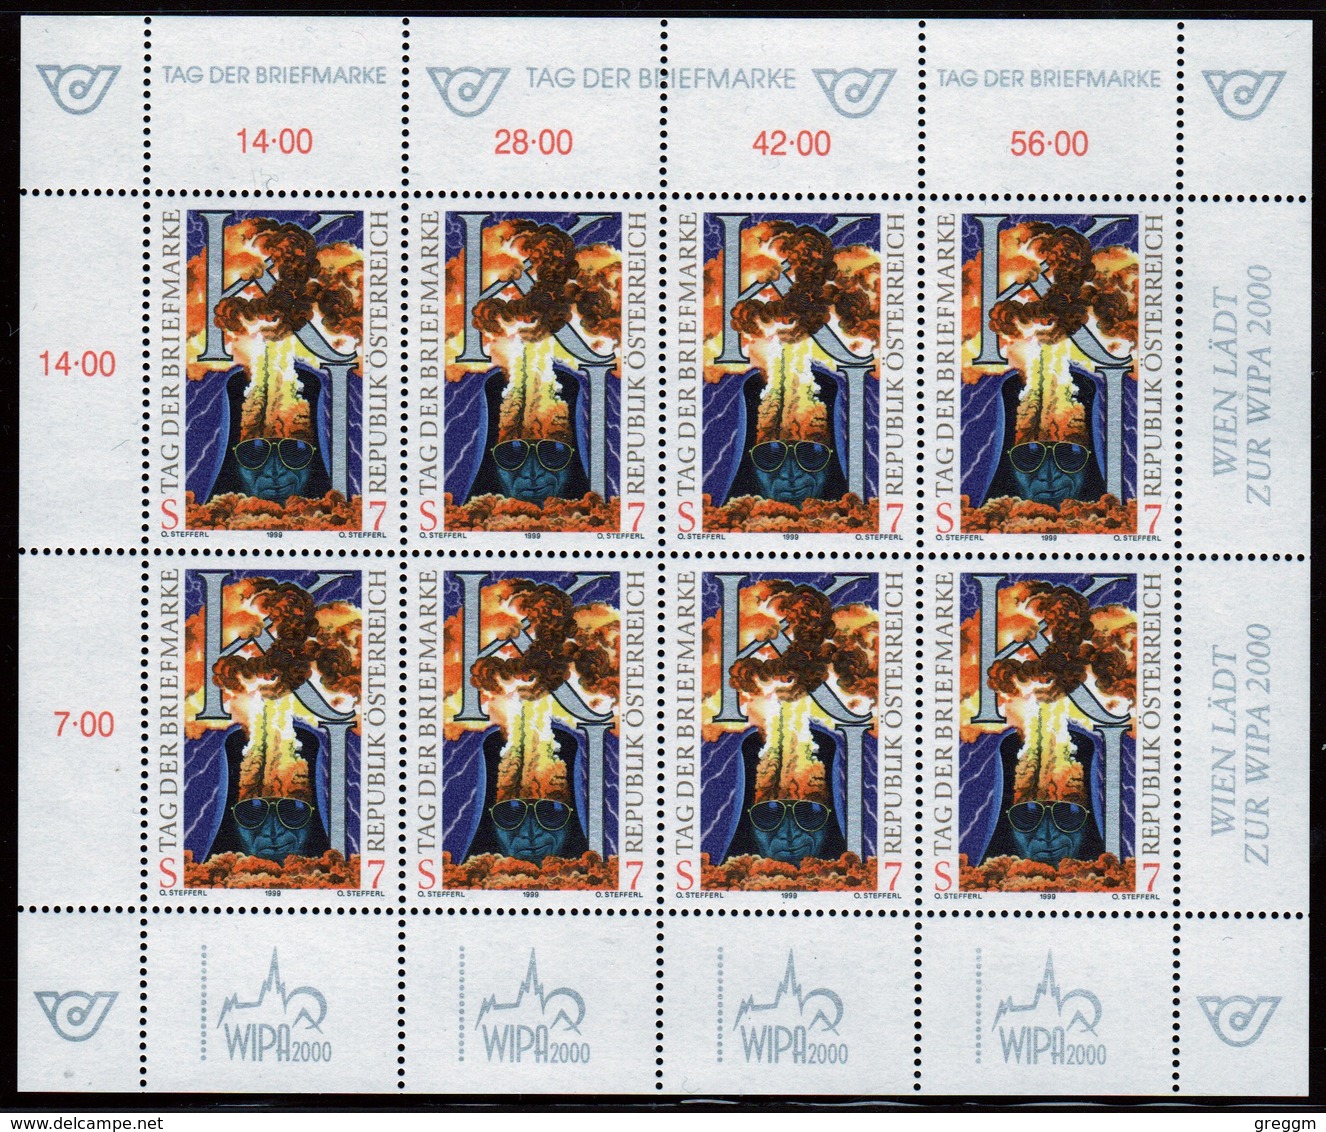 Austria 1999 Sheetlet Of Eight Stamps Issued To Celebrate Stamp Day. - Blocks & Sheetlets & Panes